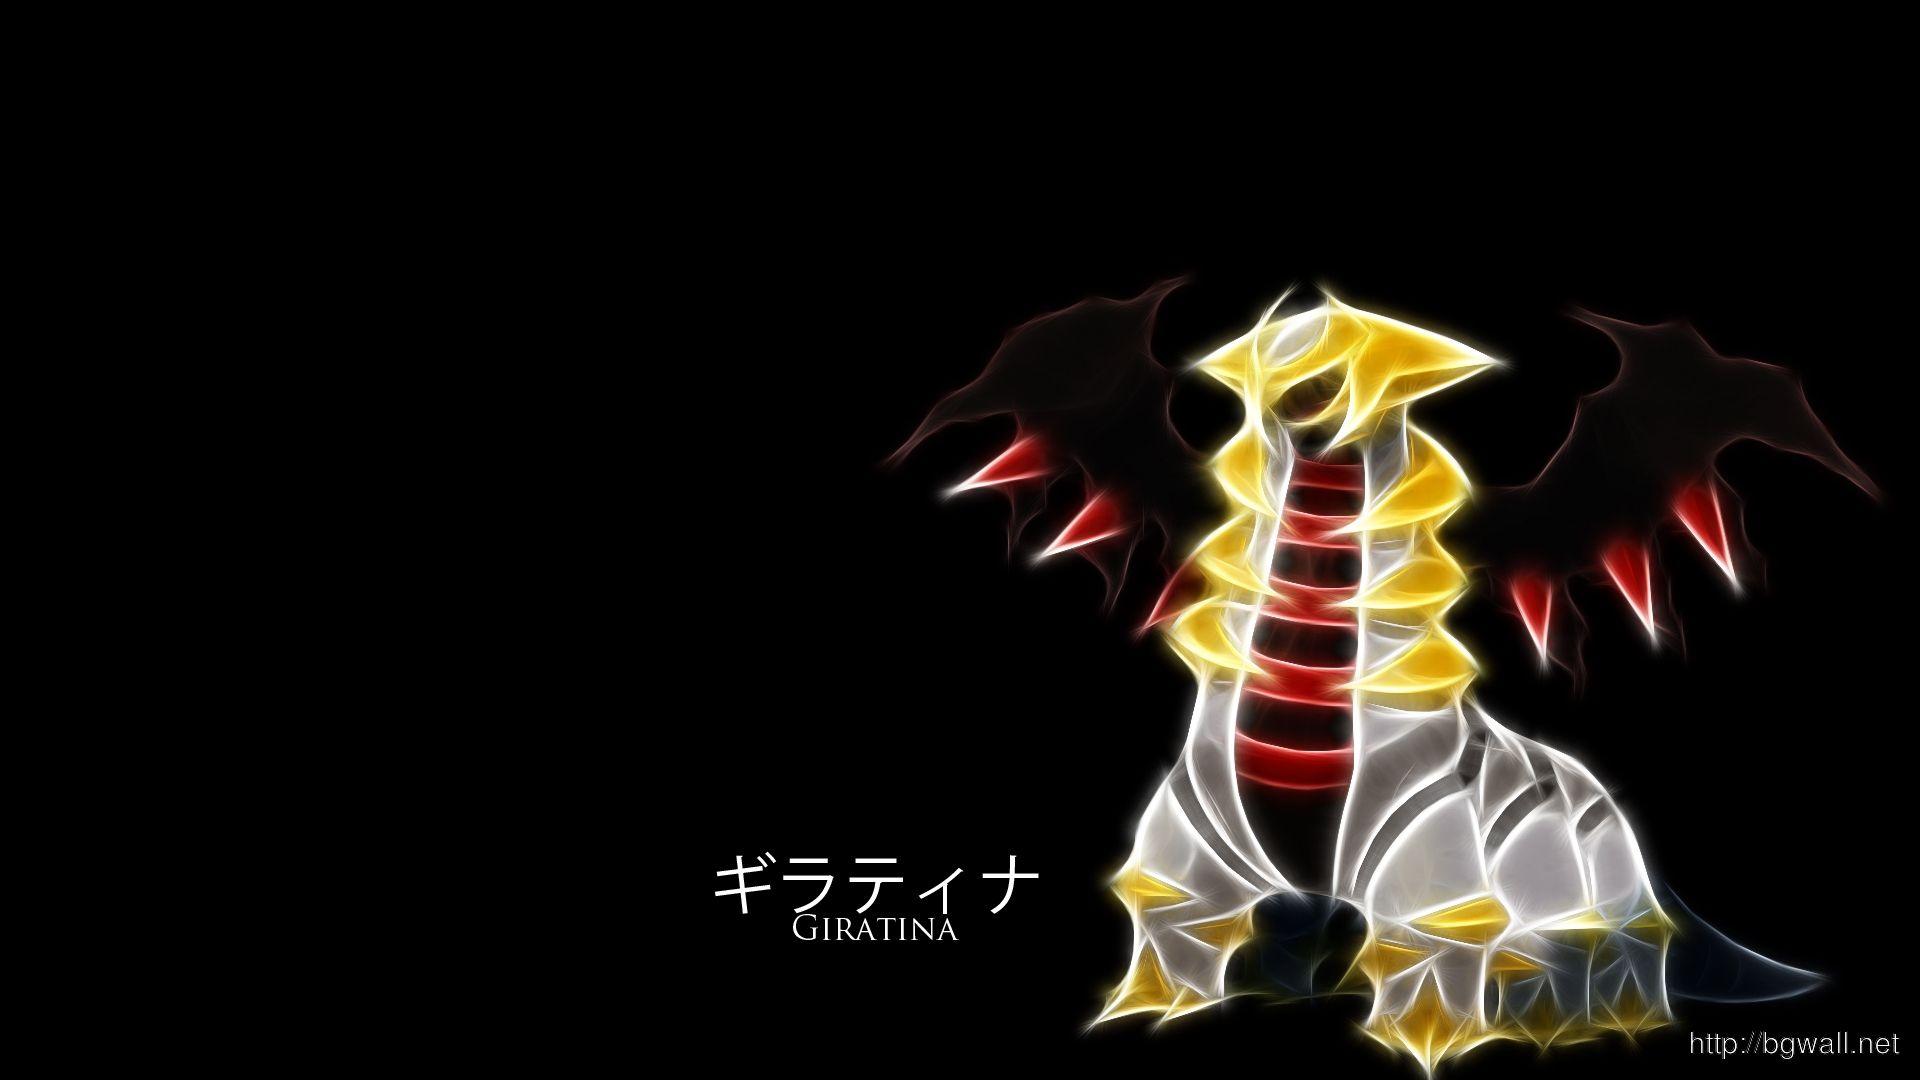 Giratina HD Wallpaper By Therierie